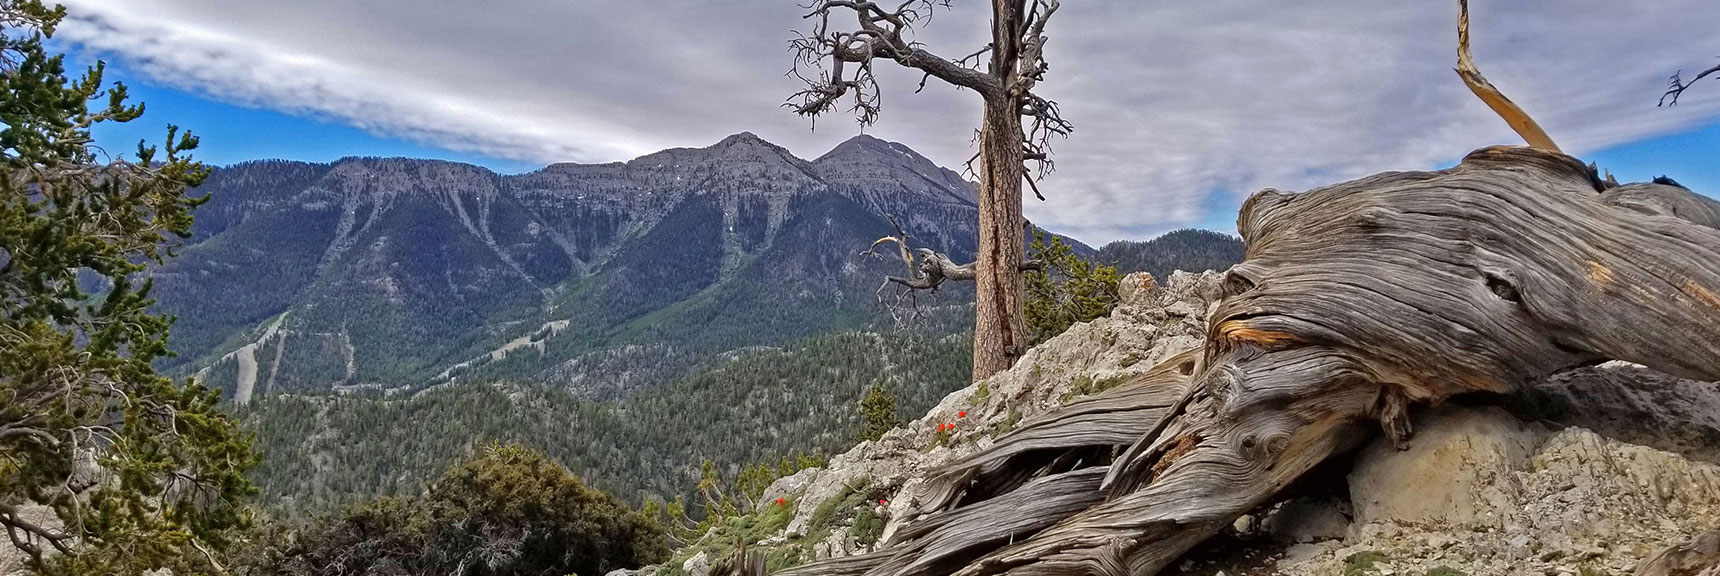 Topping the Mid Ridge with a View of Lee Peak (left) and Charleston Peak (right). | The Sisters South | Lee Canyon | Mt Charleston Wilderness | Spring Mountains, Nevada